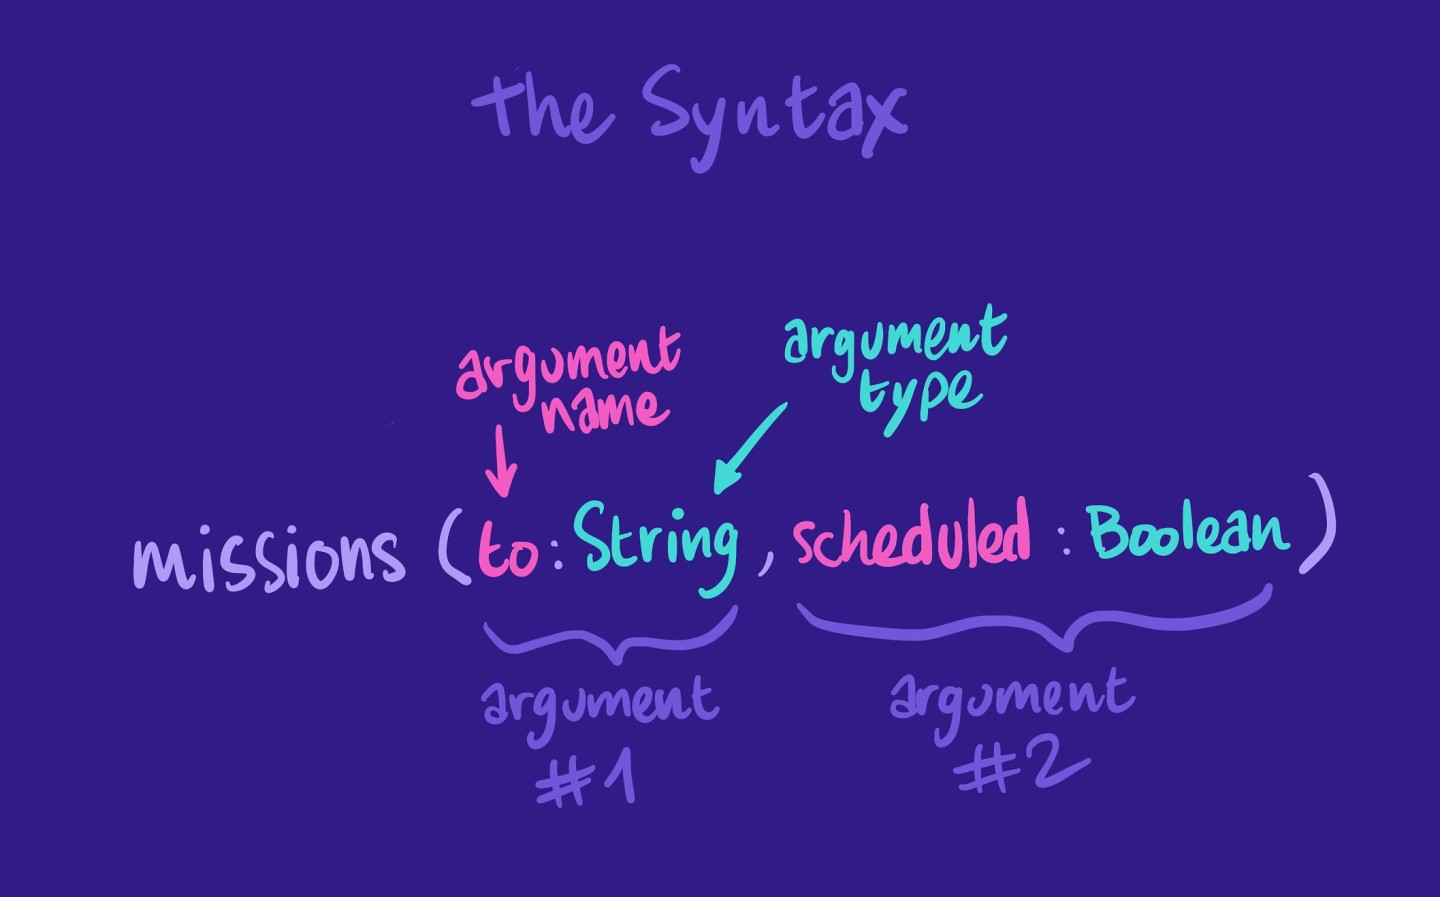 Illustration showing the syntax breakdown of using GraphQL arguments